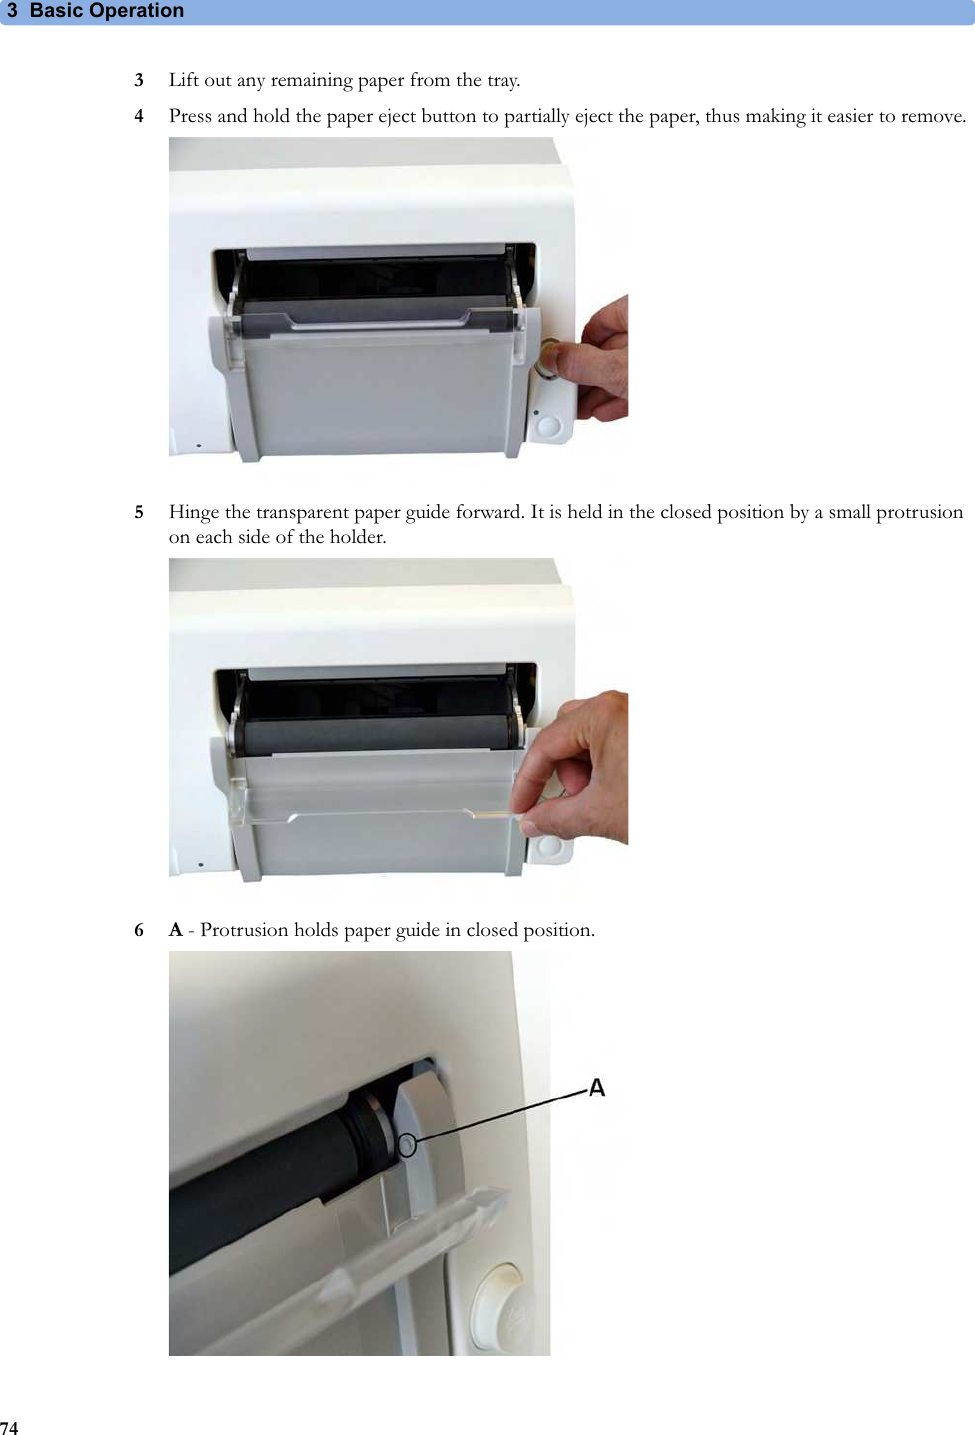 3  Basic Operation743Lift out any remaining paper from the tray. 4Press and hold the paper eject button to partially eject the paper, thus making it easier to remove.5Hinge the transparent paper guide forward. It is held in the closed position by a small protrusion on each side of the holder.6A - Protrusion holds paper guide in closed position.